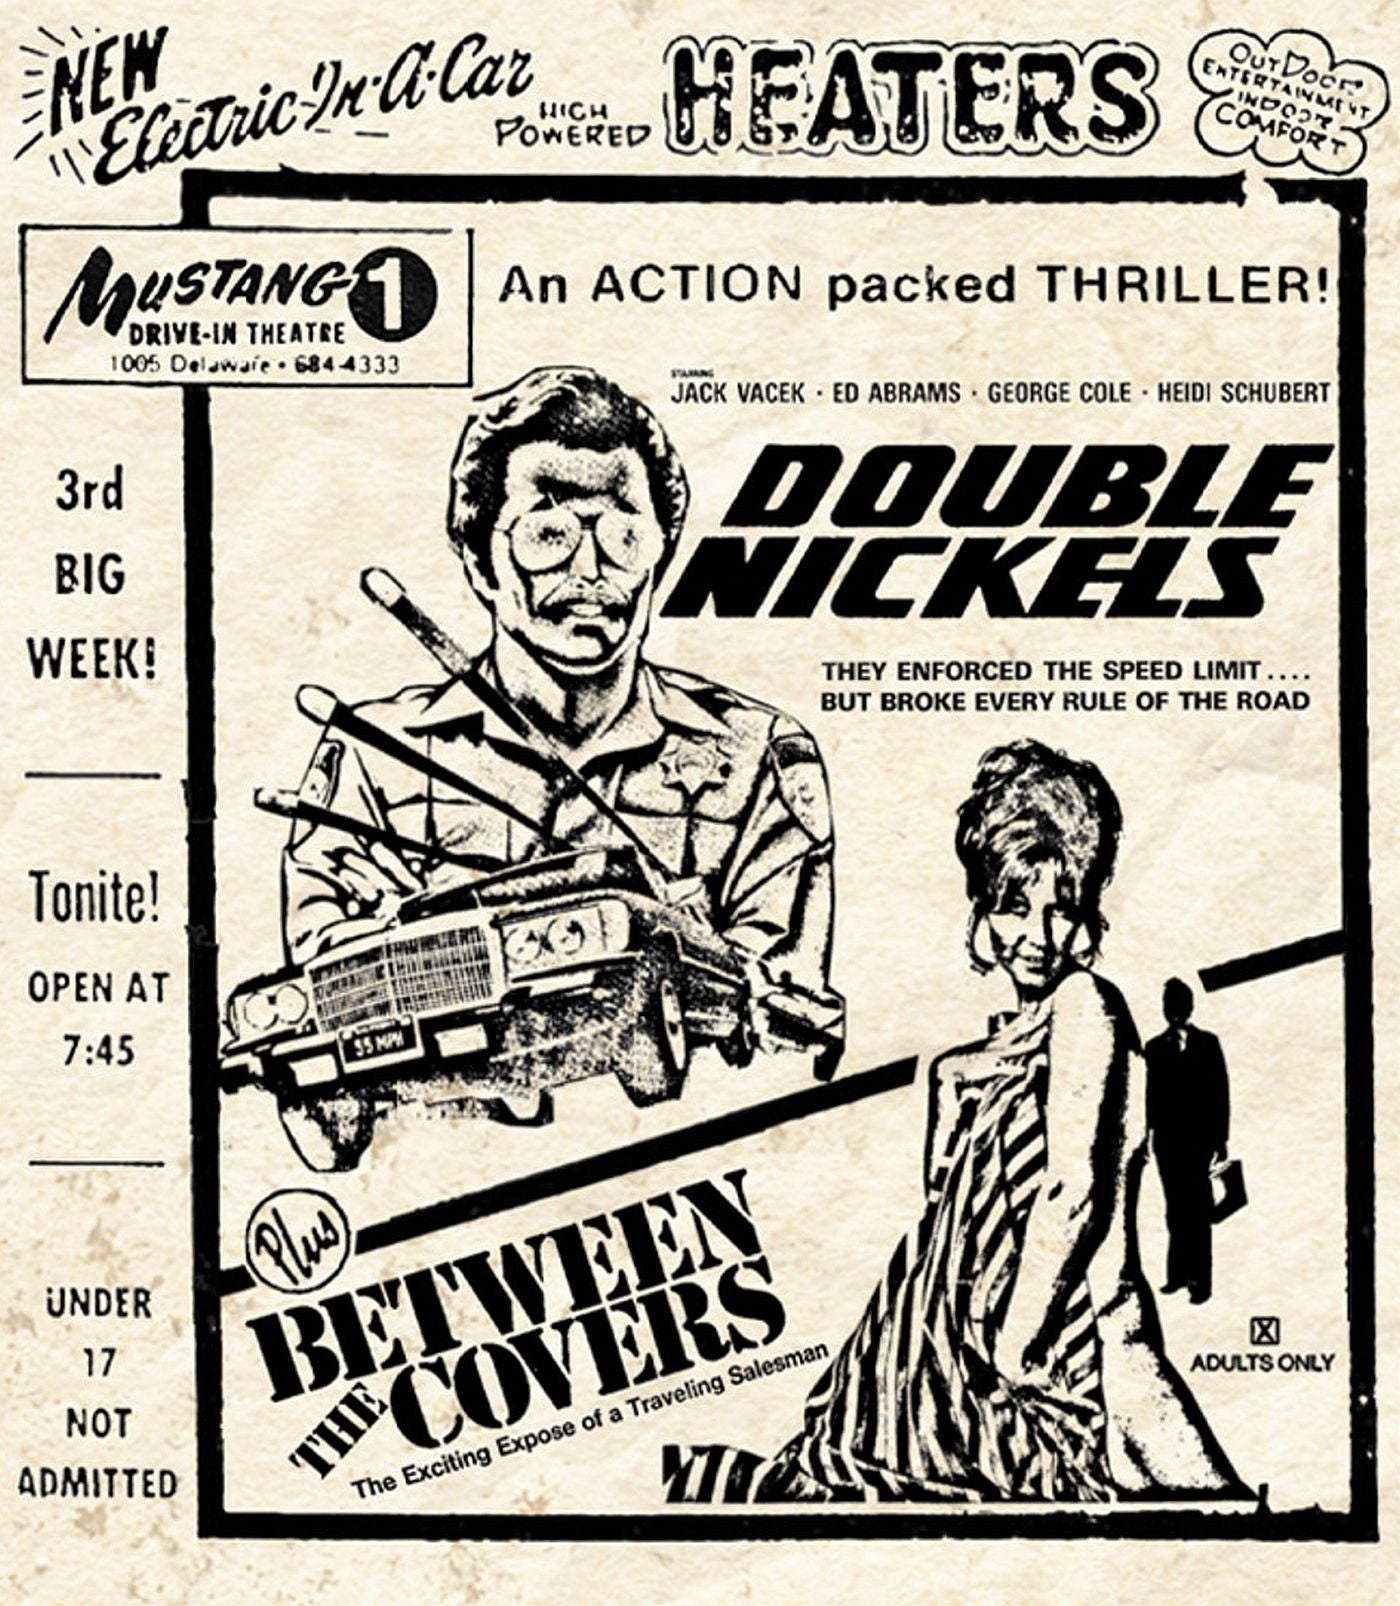 DOUBLE NICKELS / BETWEEN THE COVERS BLU-RAY